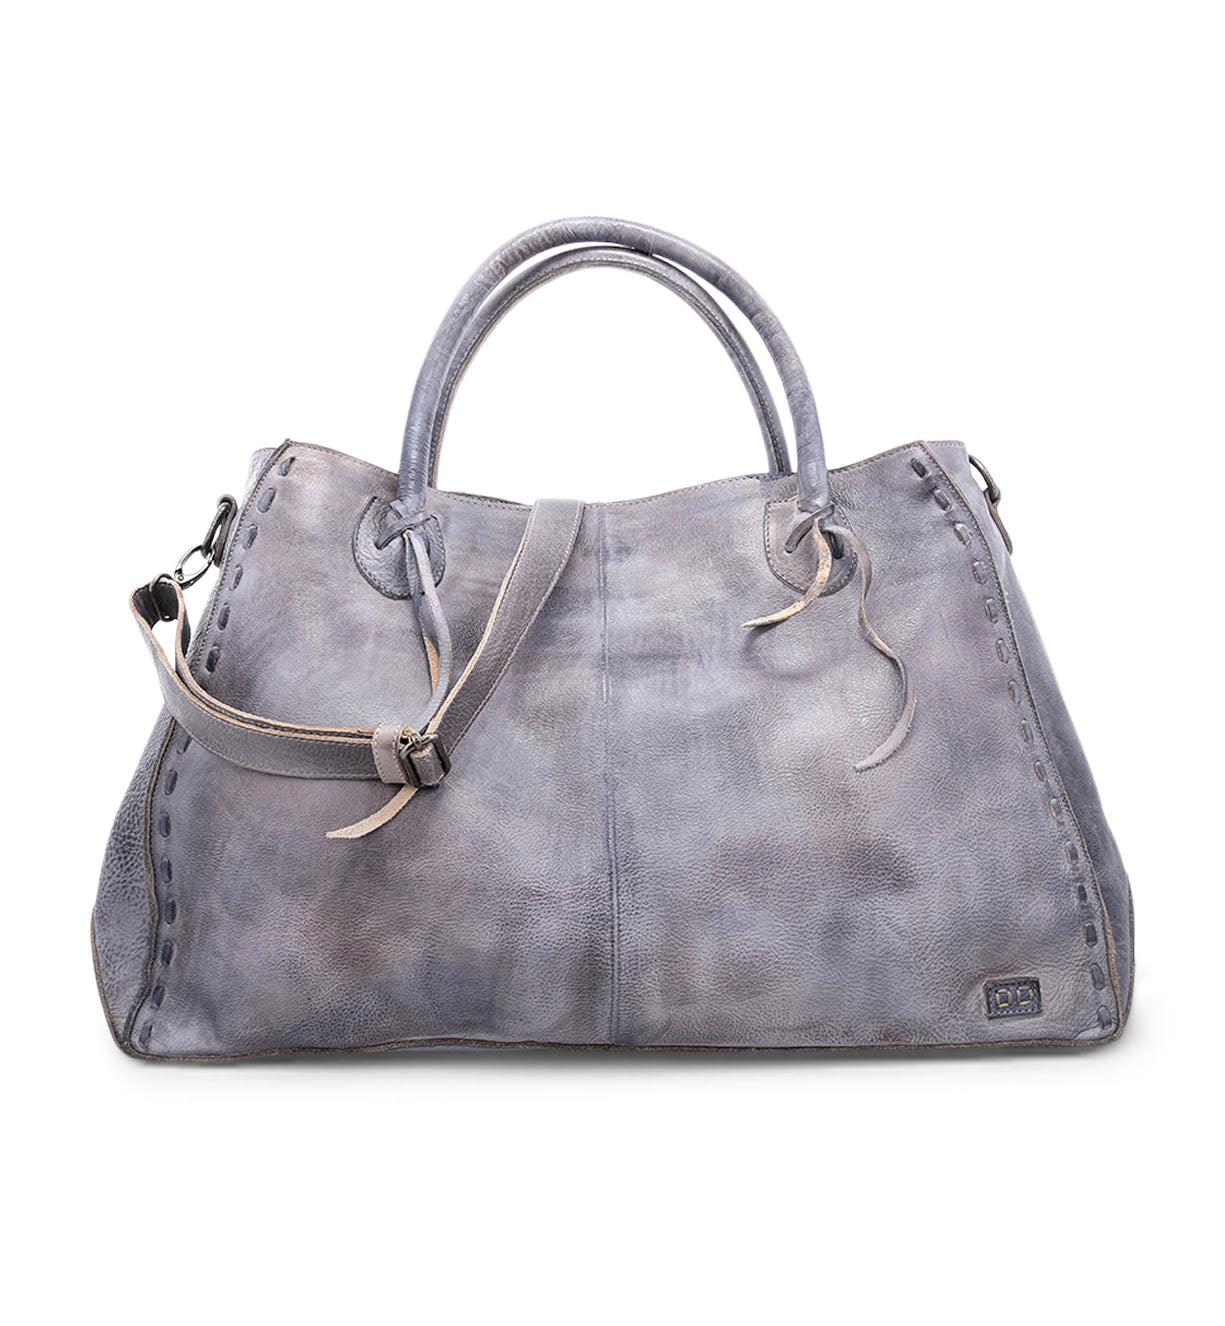 A Bed Stu Rockaway grey leather handbag with straps and handles, combining functionality and style.